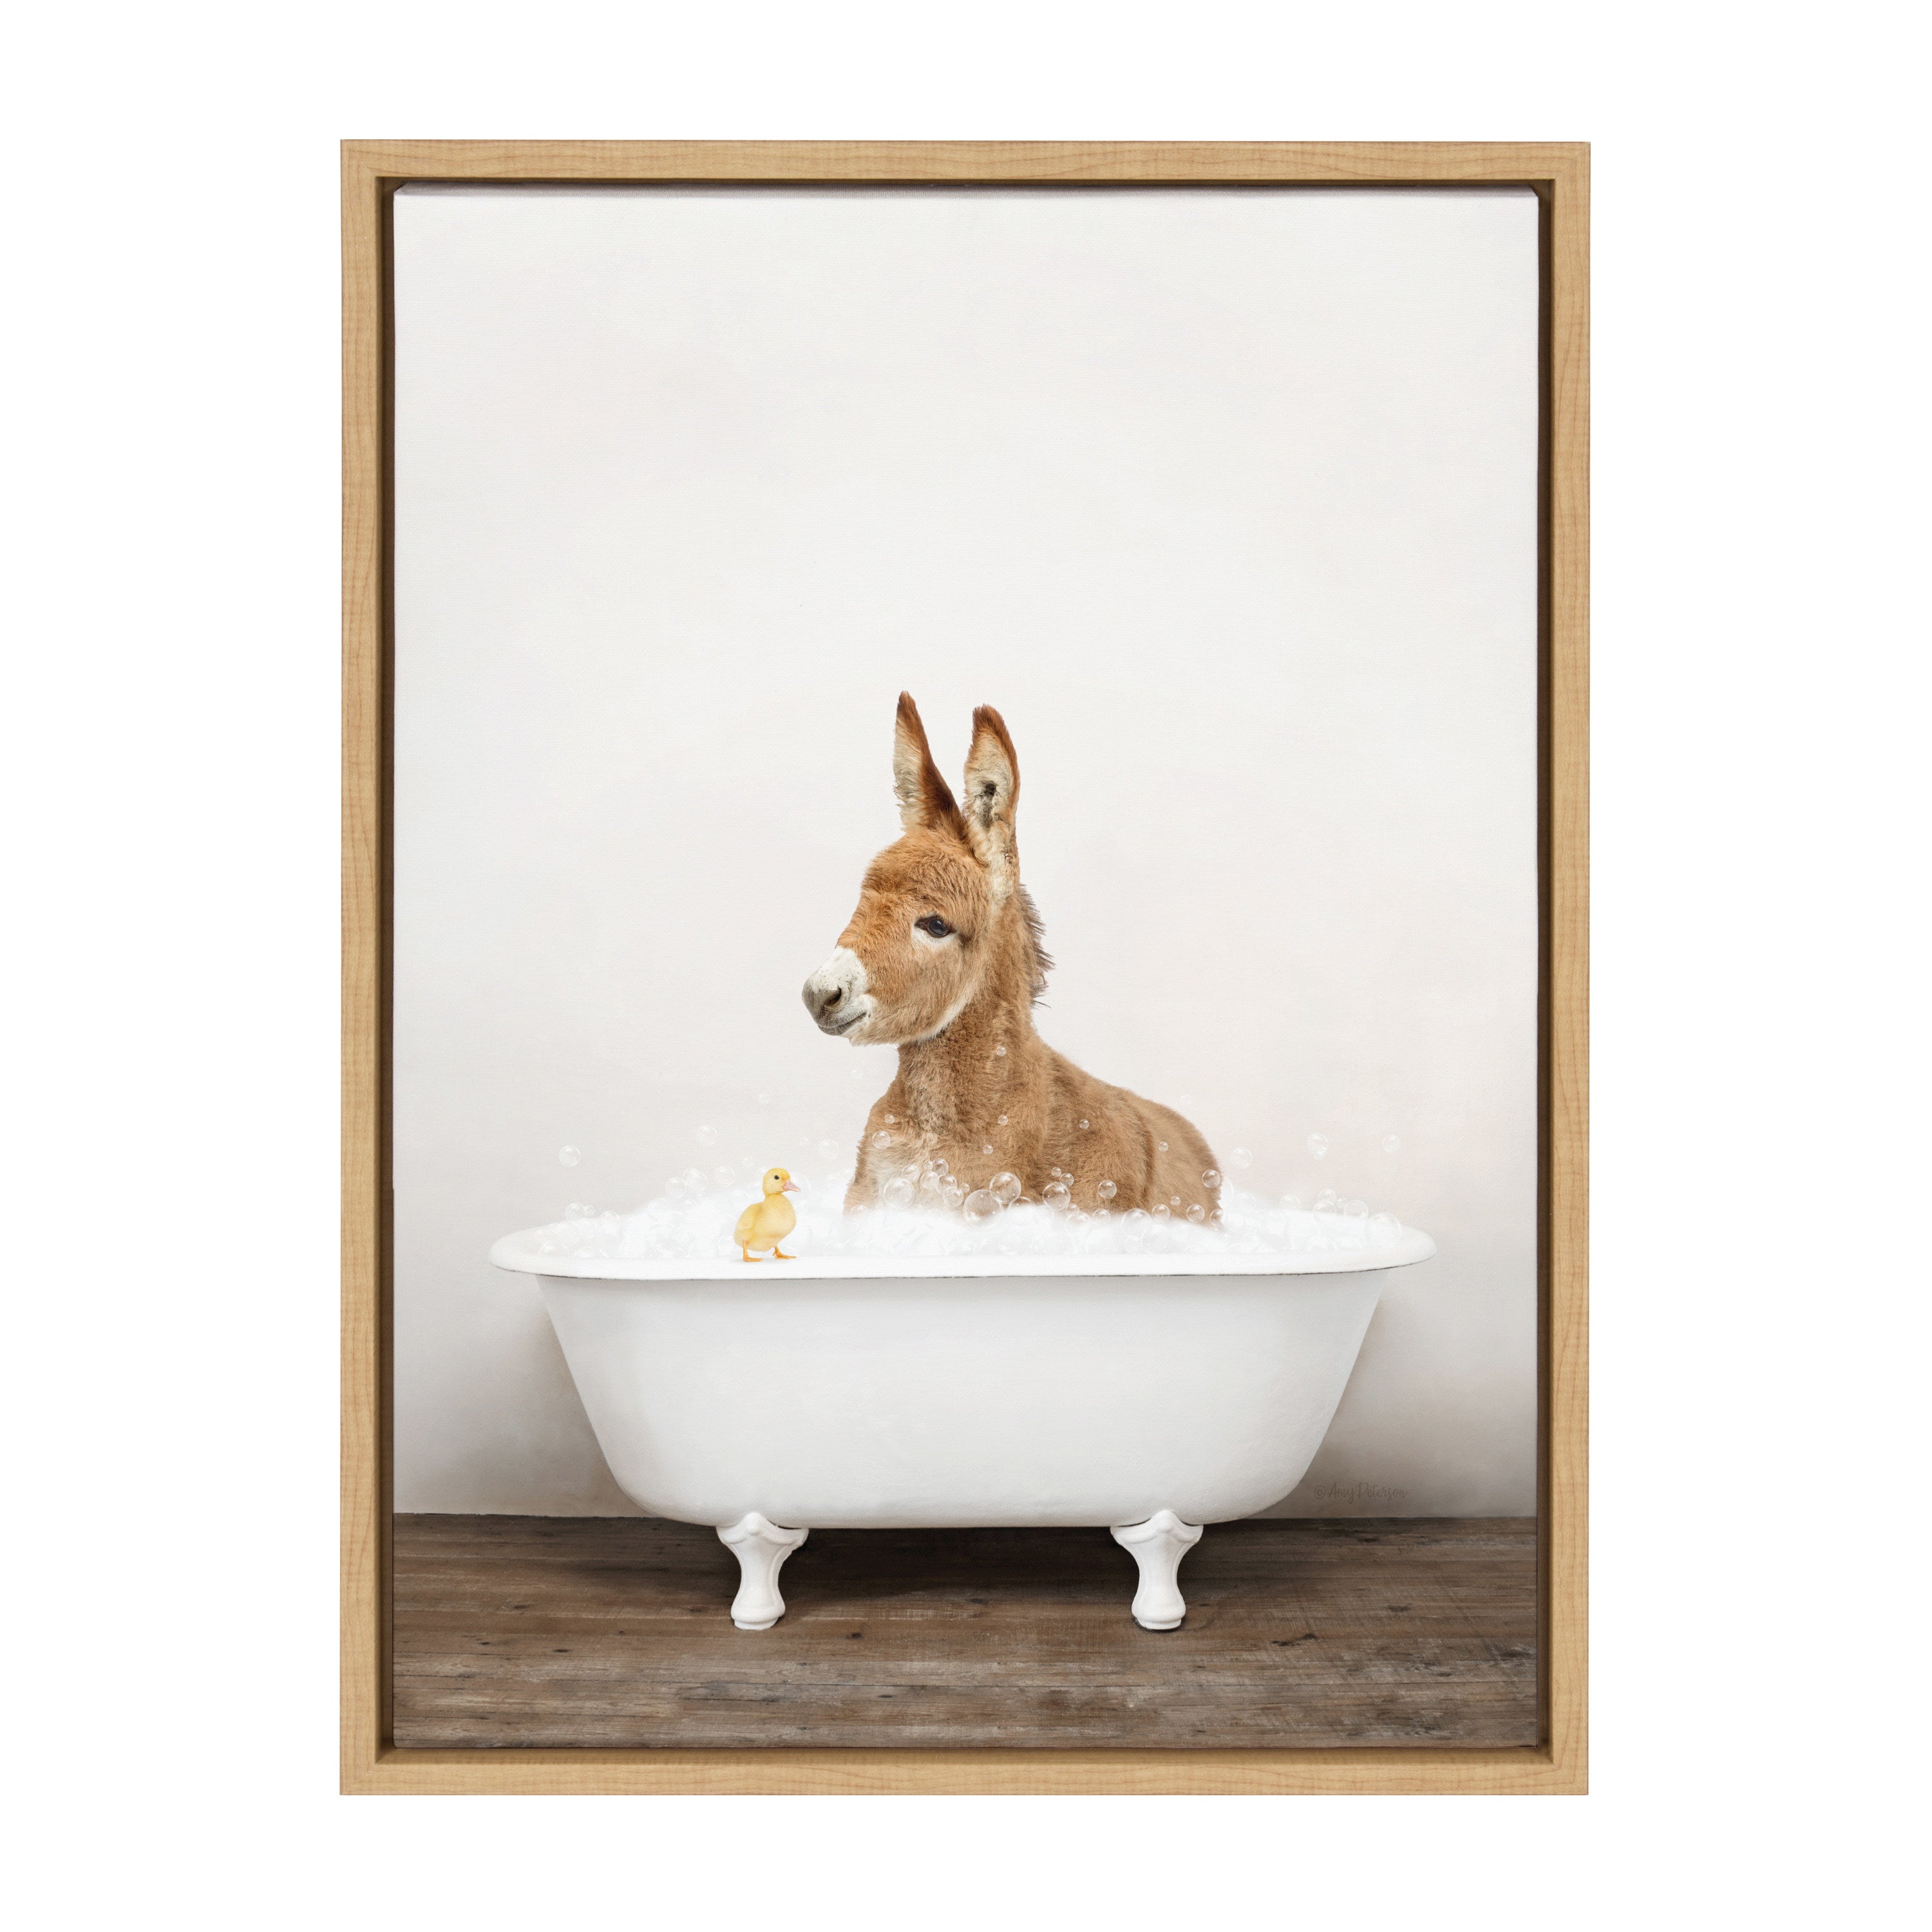 Sylvie Baby Donkey in Rustic Bath Framed Canvas by Amy Peterson Art Studio